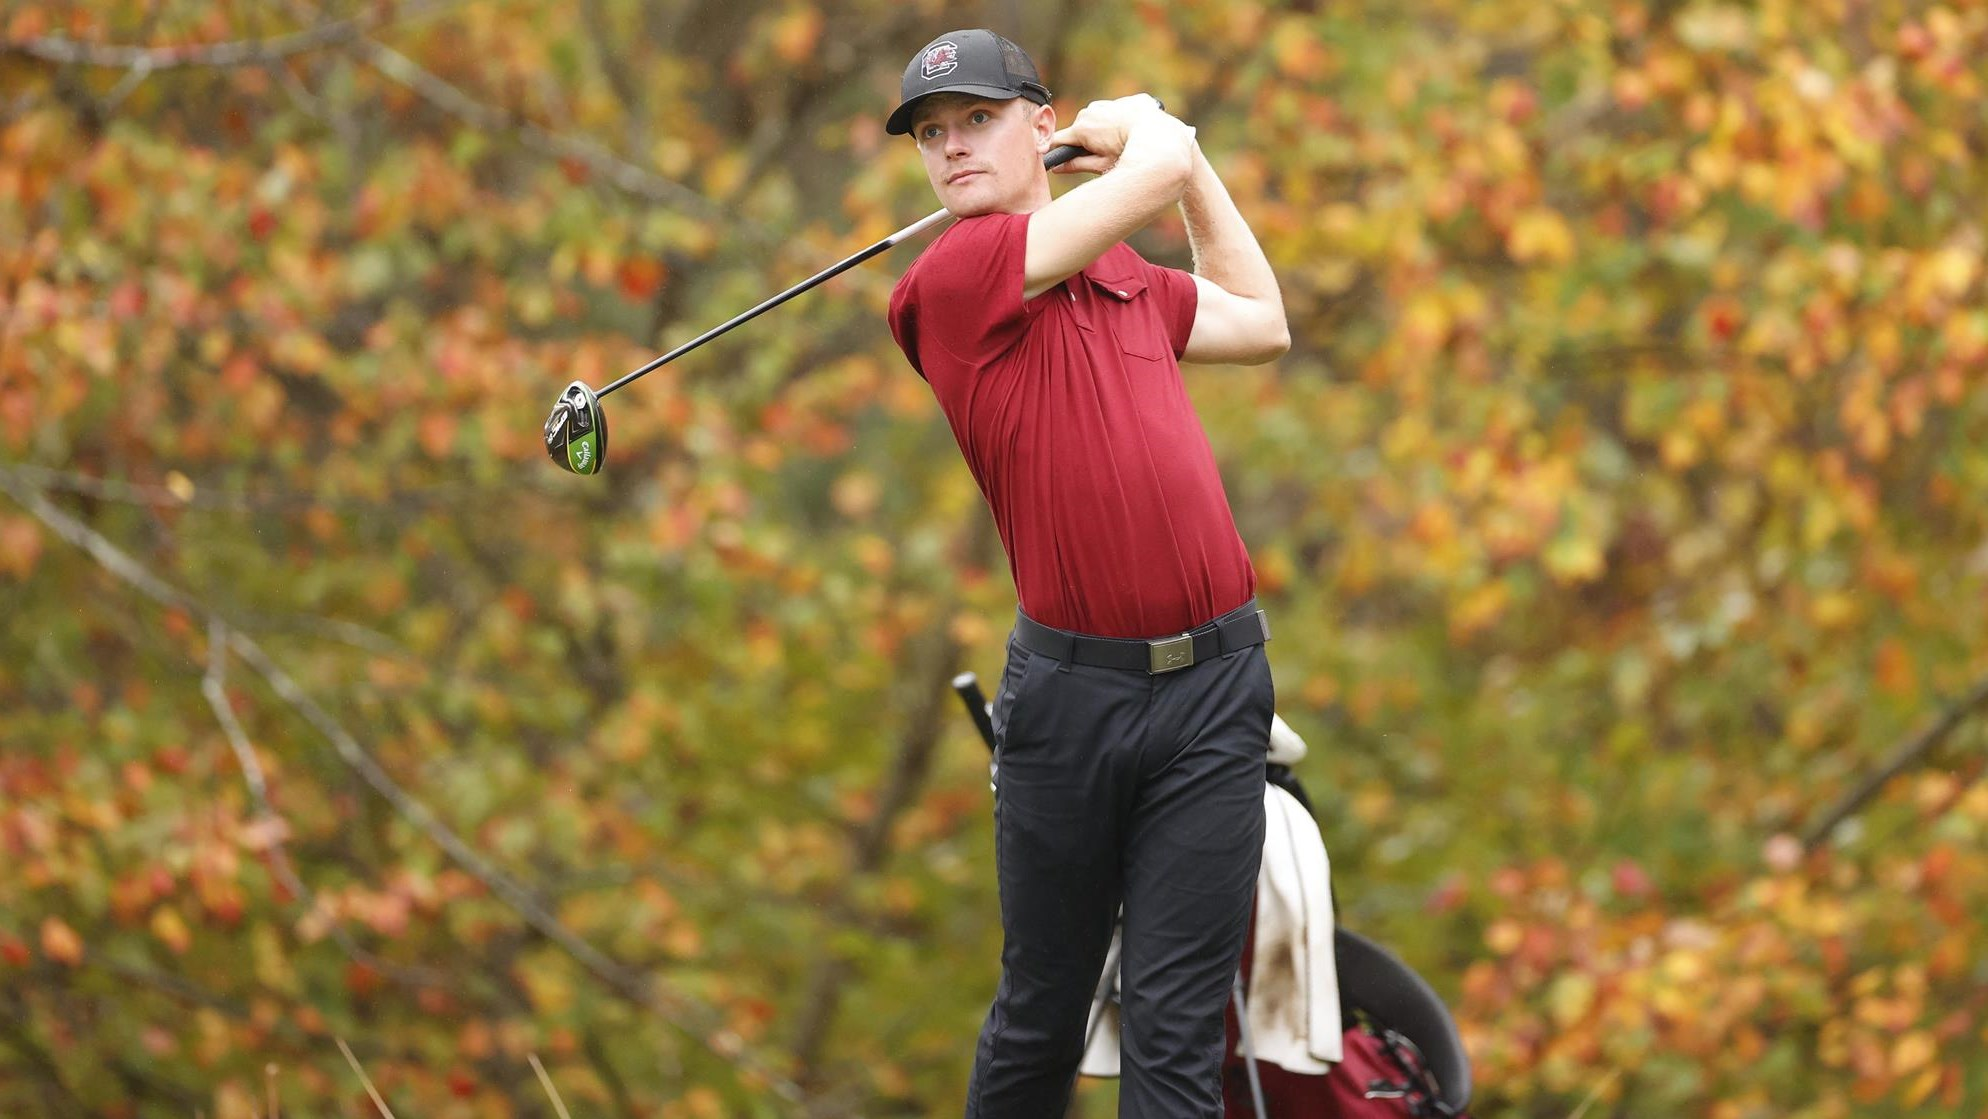 Gamecocks Take Seventh at Jerry Pate National Intercollegiate